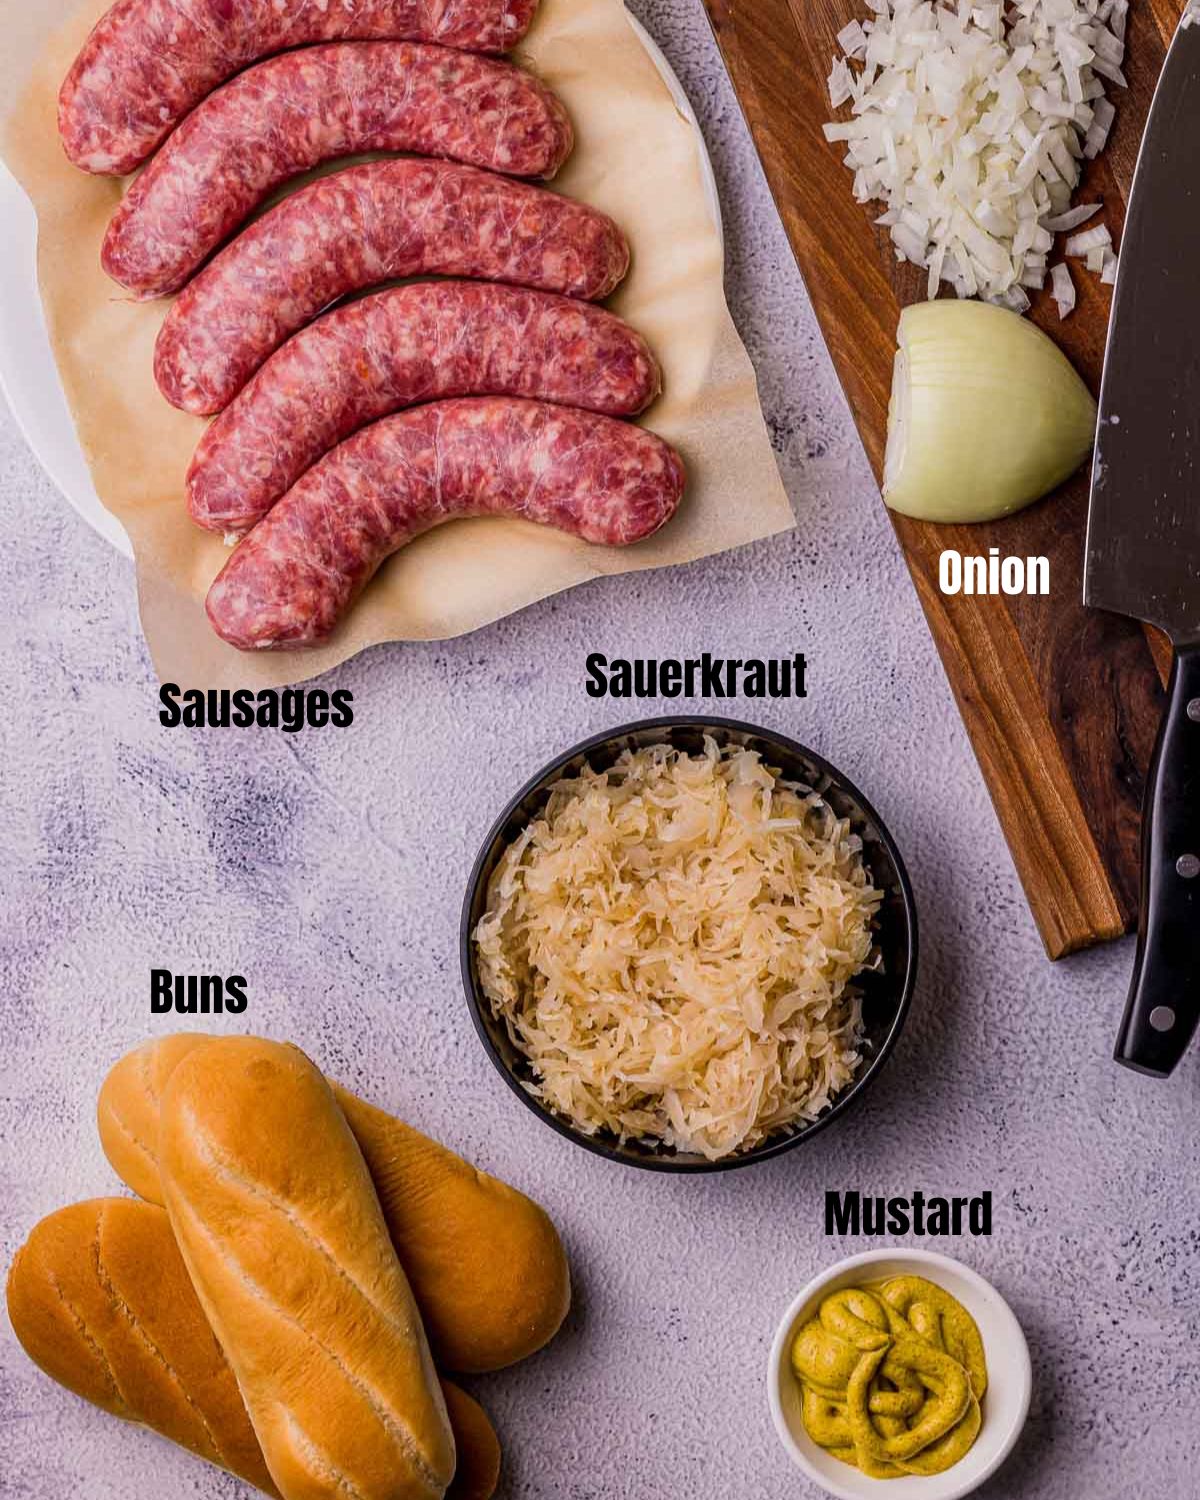 ingredients for sous vide sausage on a light colored board